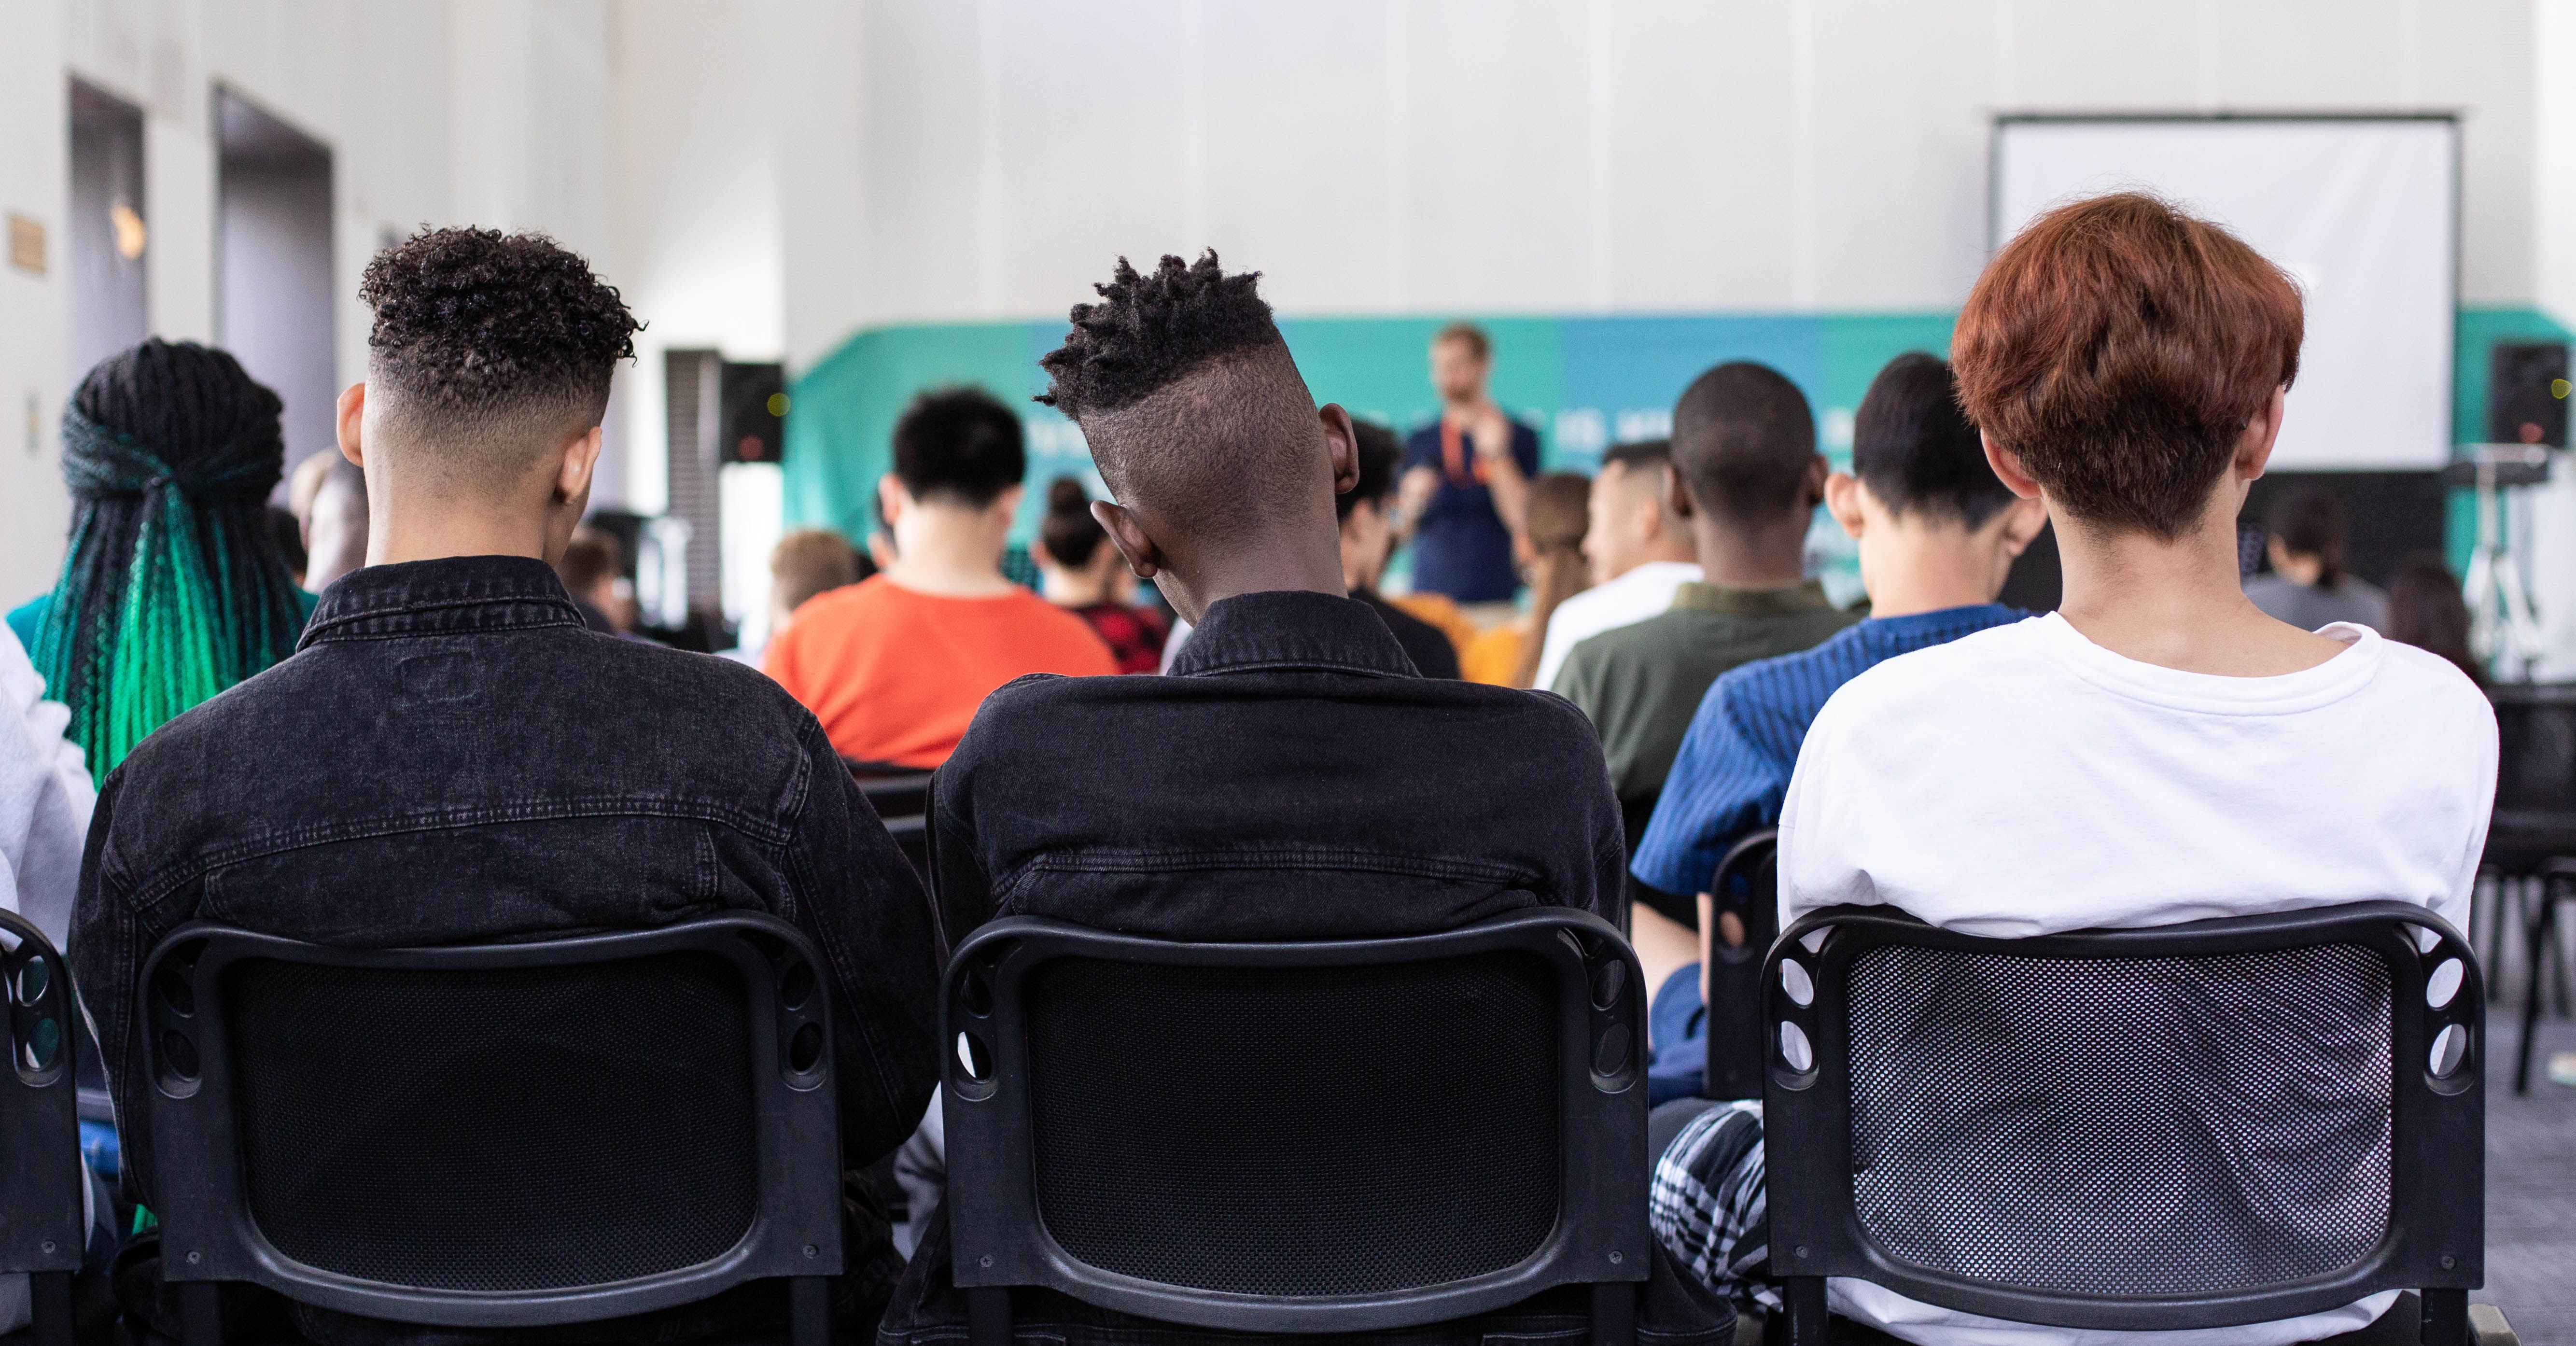 A group of teens sit together in a classroom.